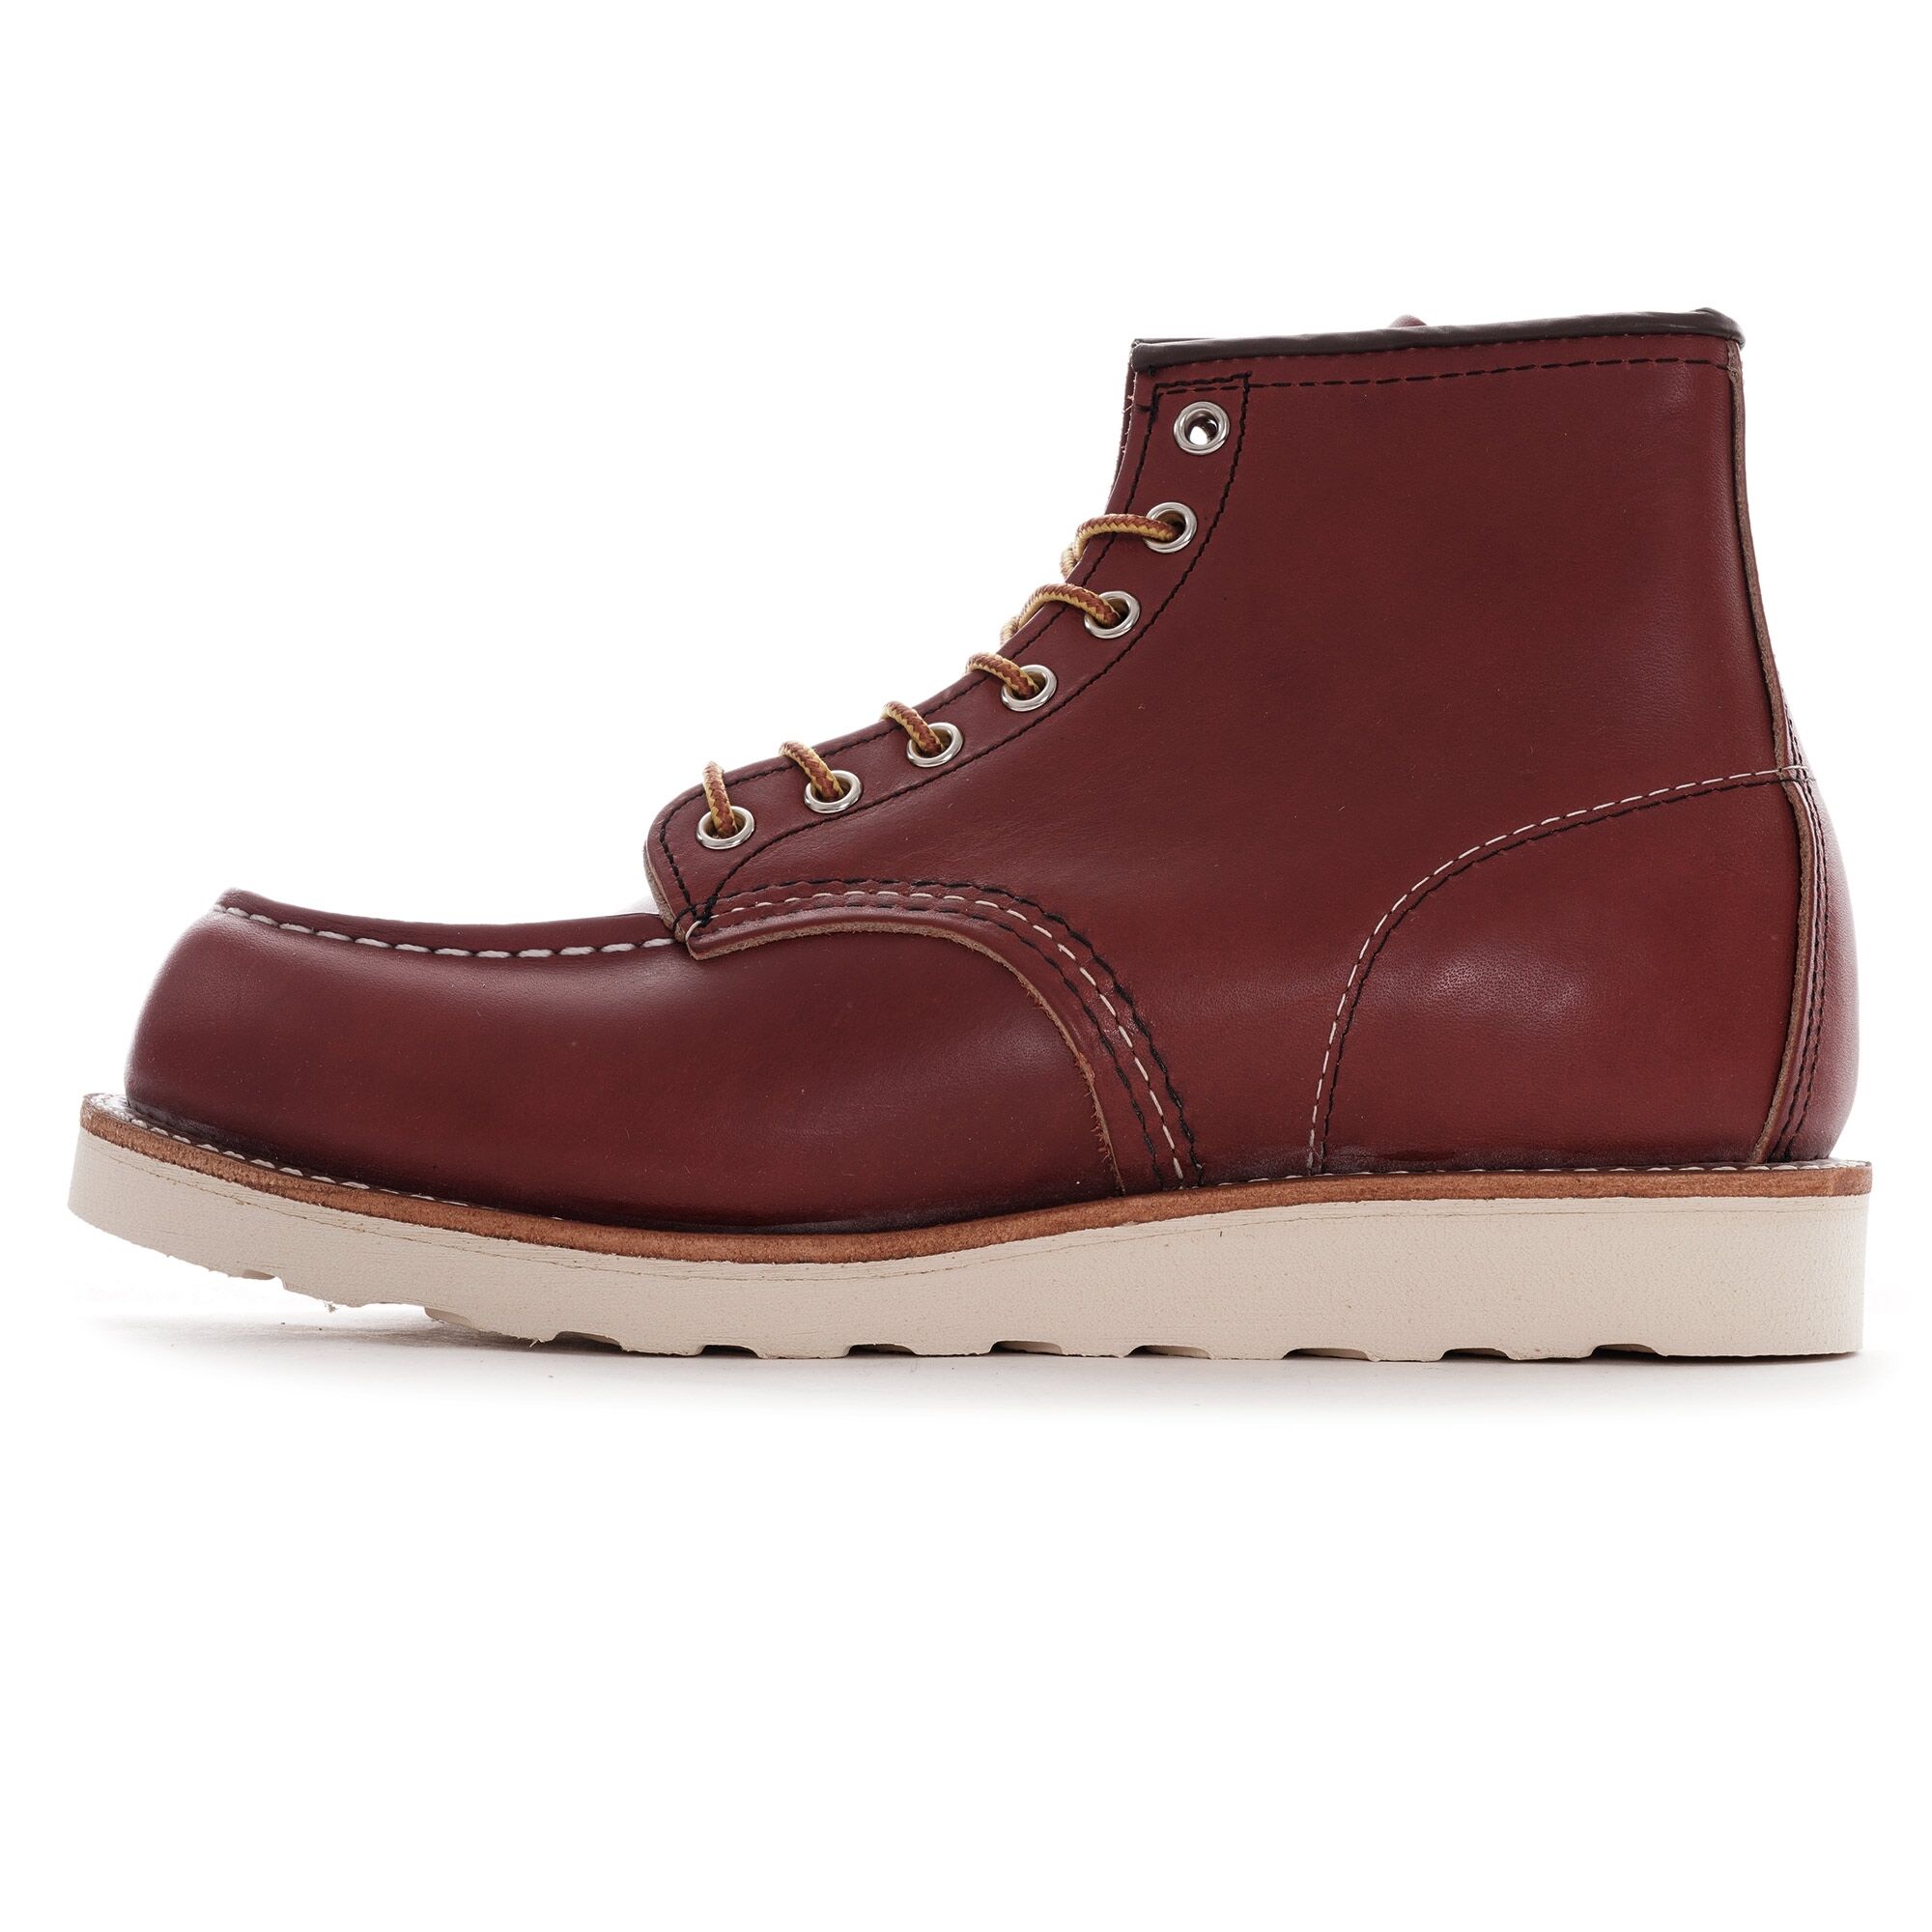 Red Wing Classic Moc Toe Boot - Briar - 8875D-BRN 6 BOOT Colour: Brown - Brown - male - Size: UK 6.5